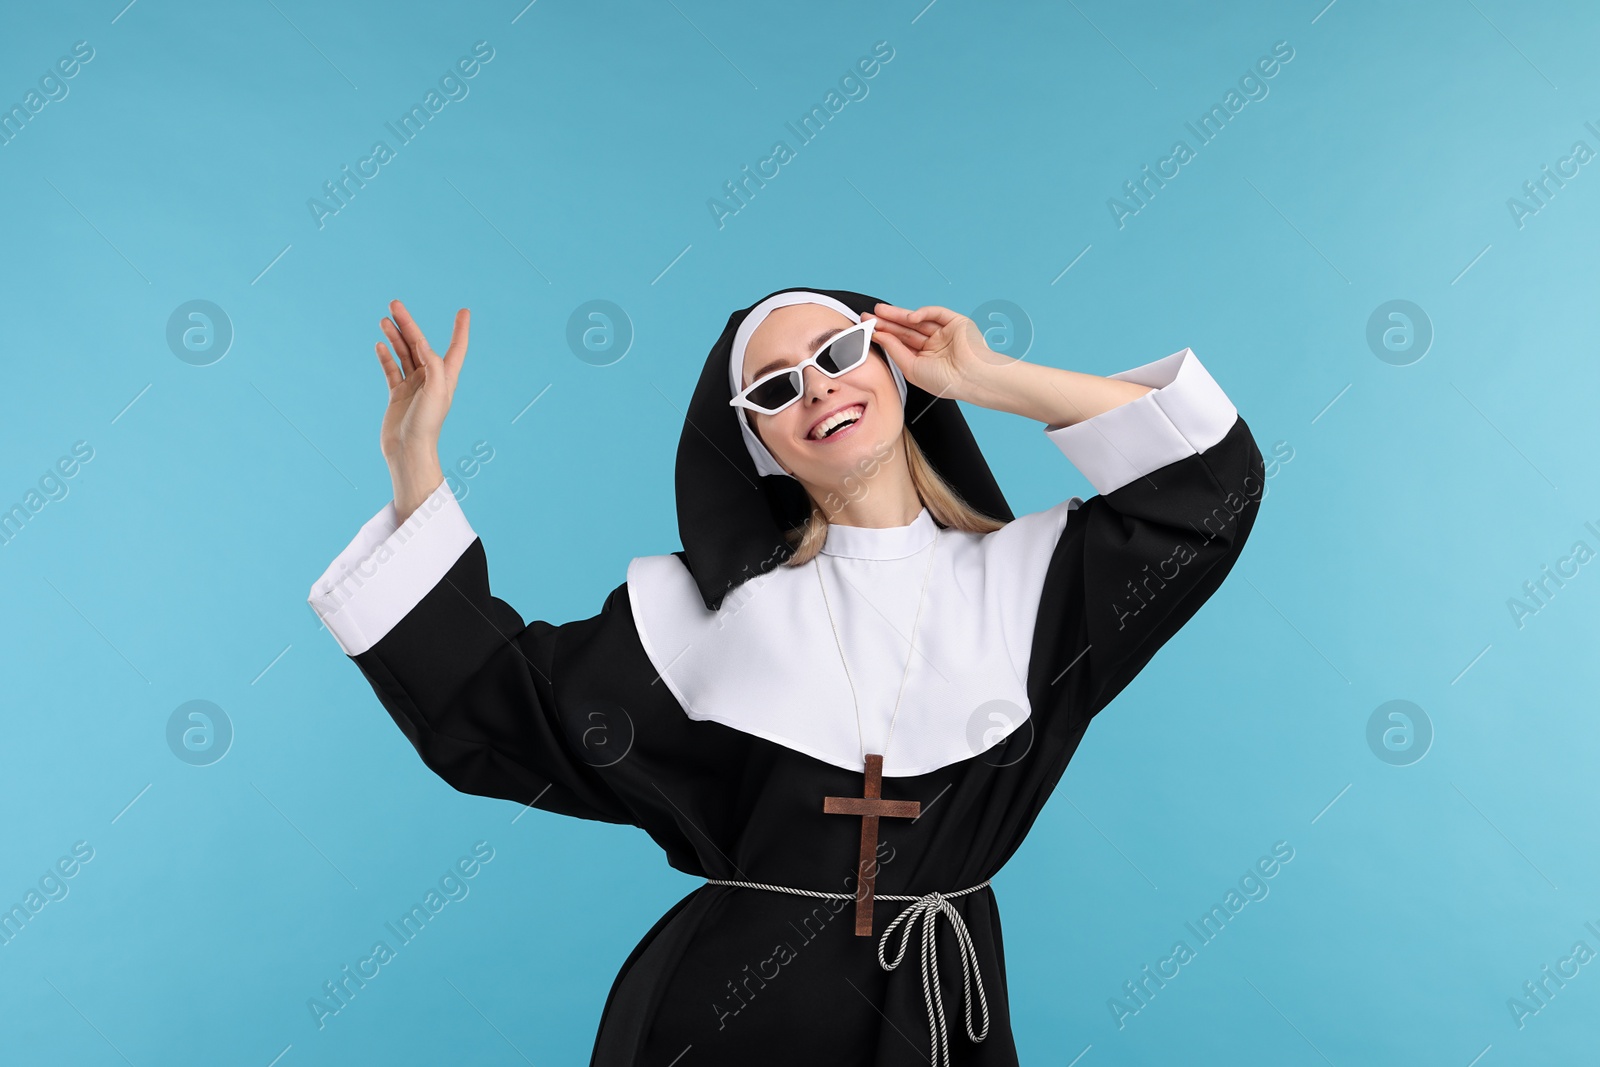 Photo of Happy woman in nun habit and sunglasses against light blue background